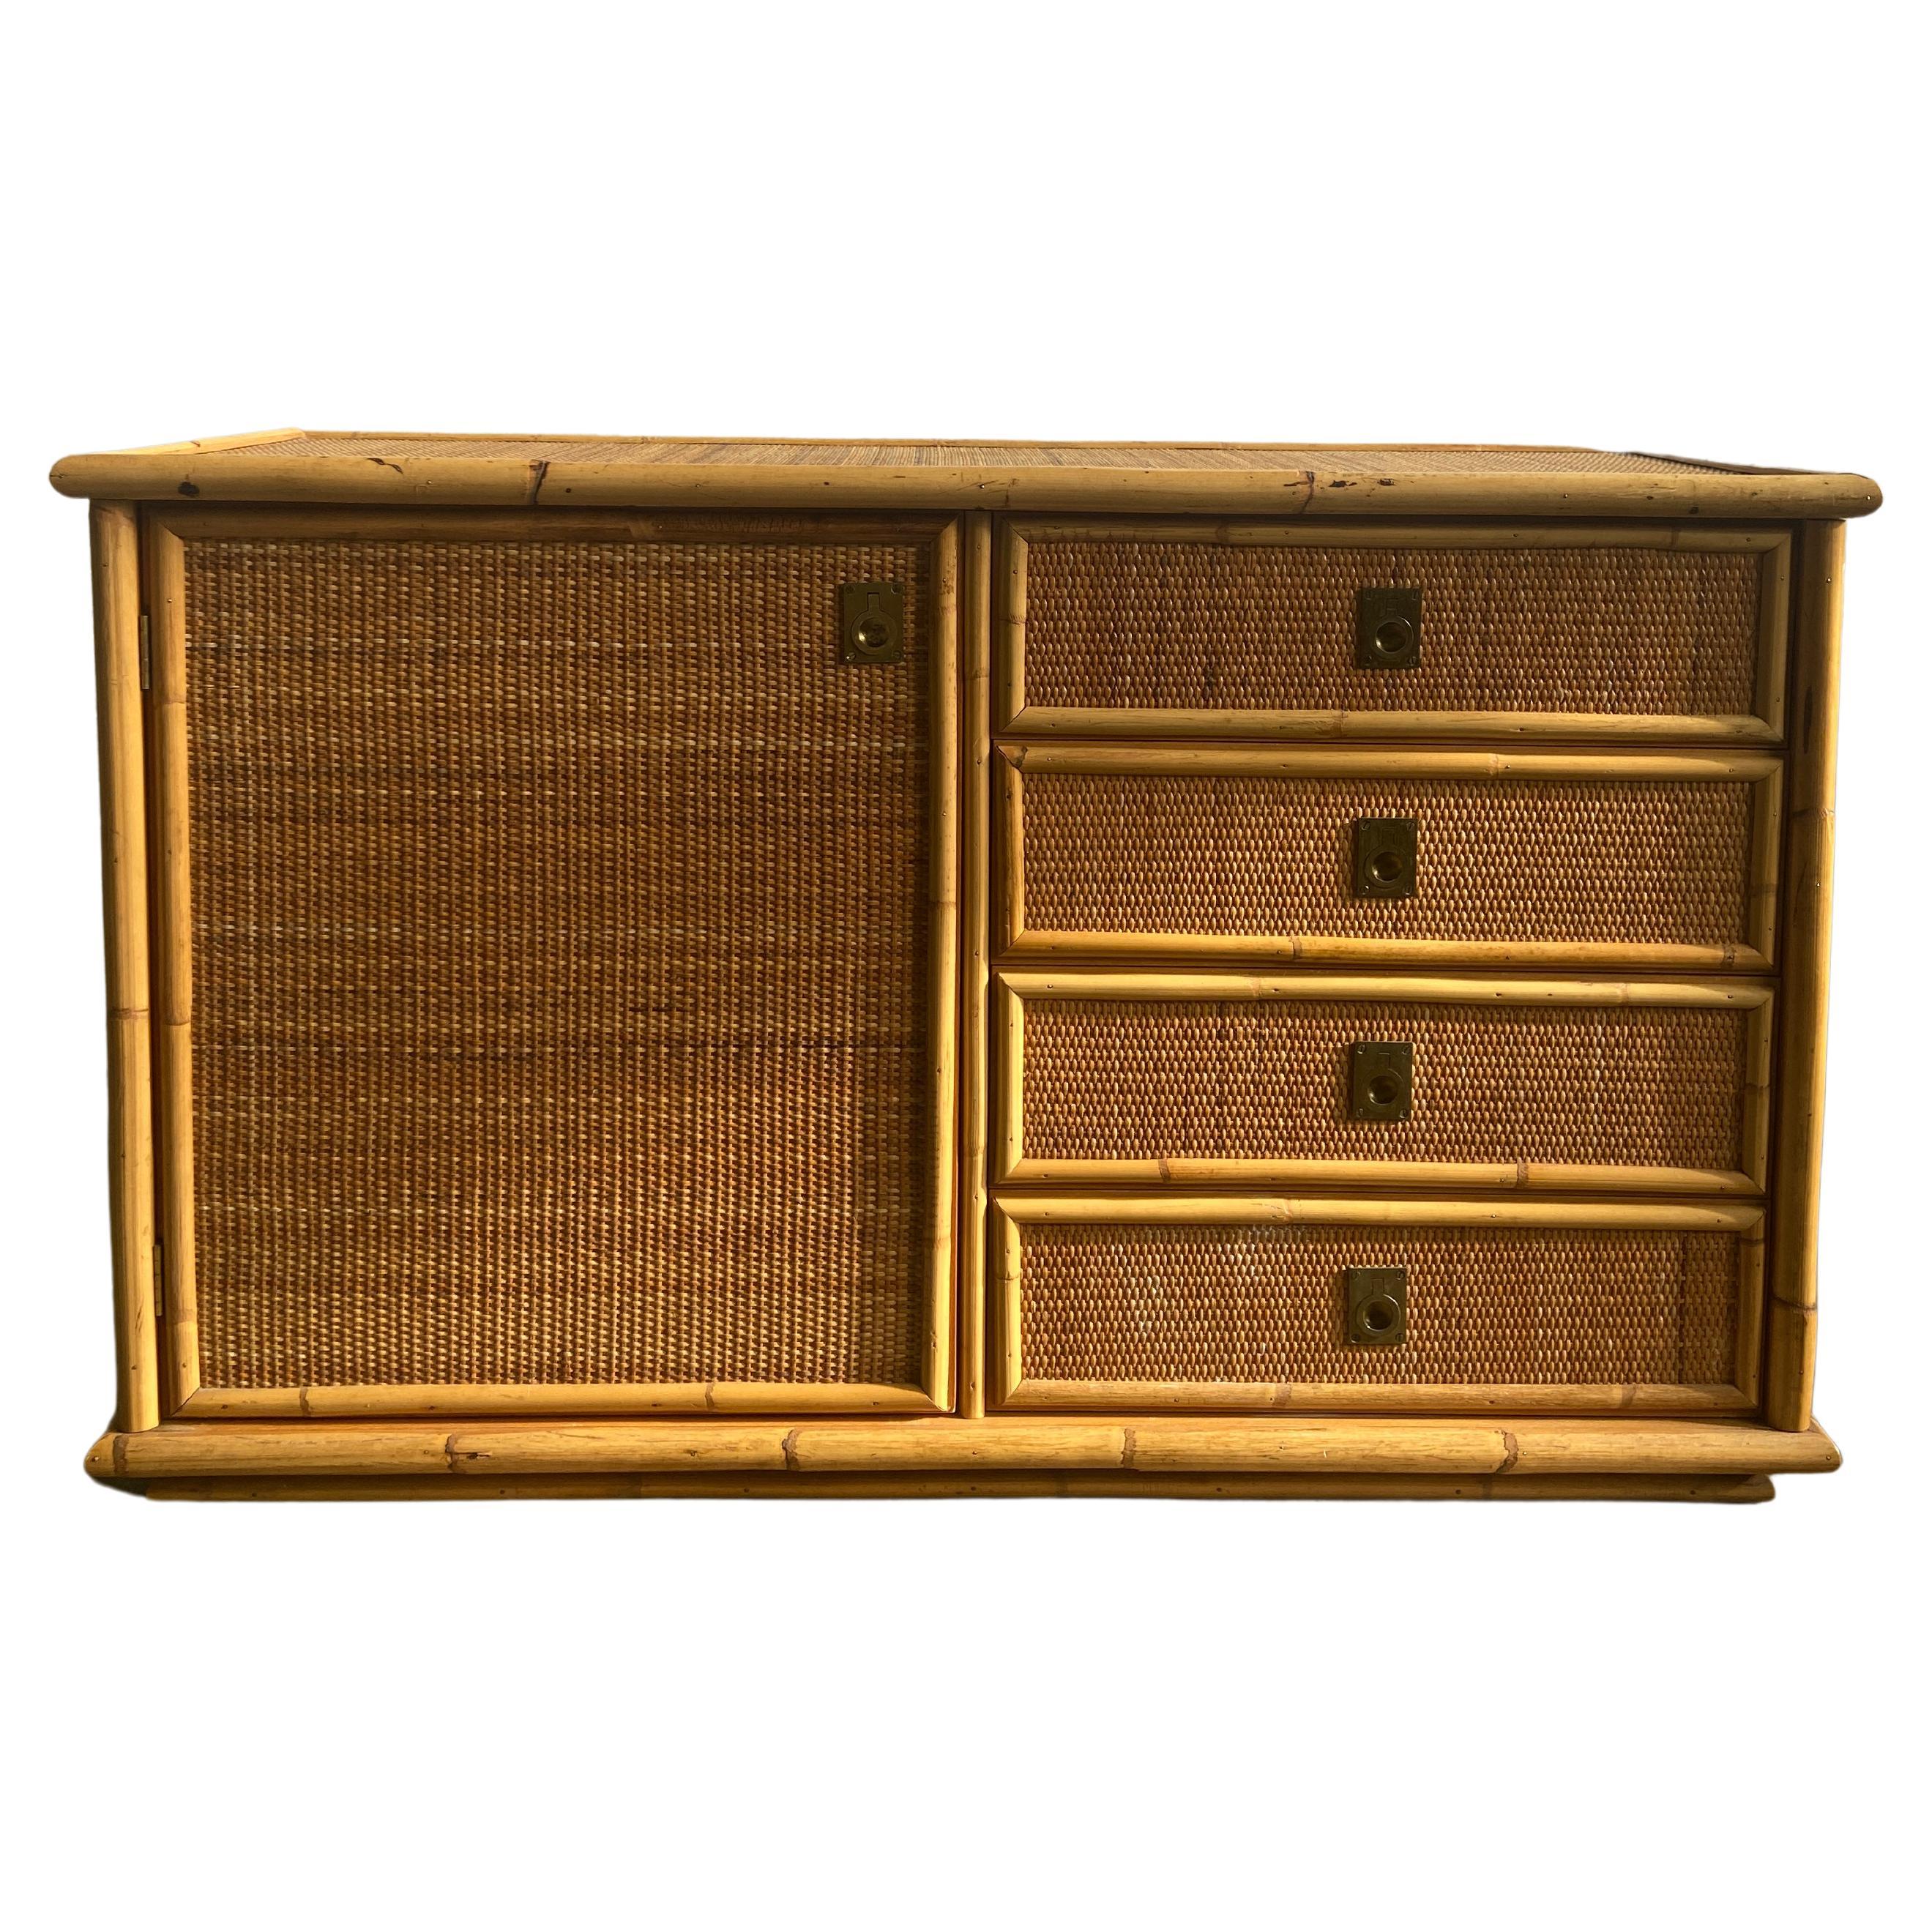 Mid-Century Modern Italian Bamboo and Rattan Sideboard by Dal Vera. 1970s